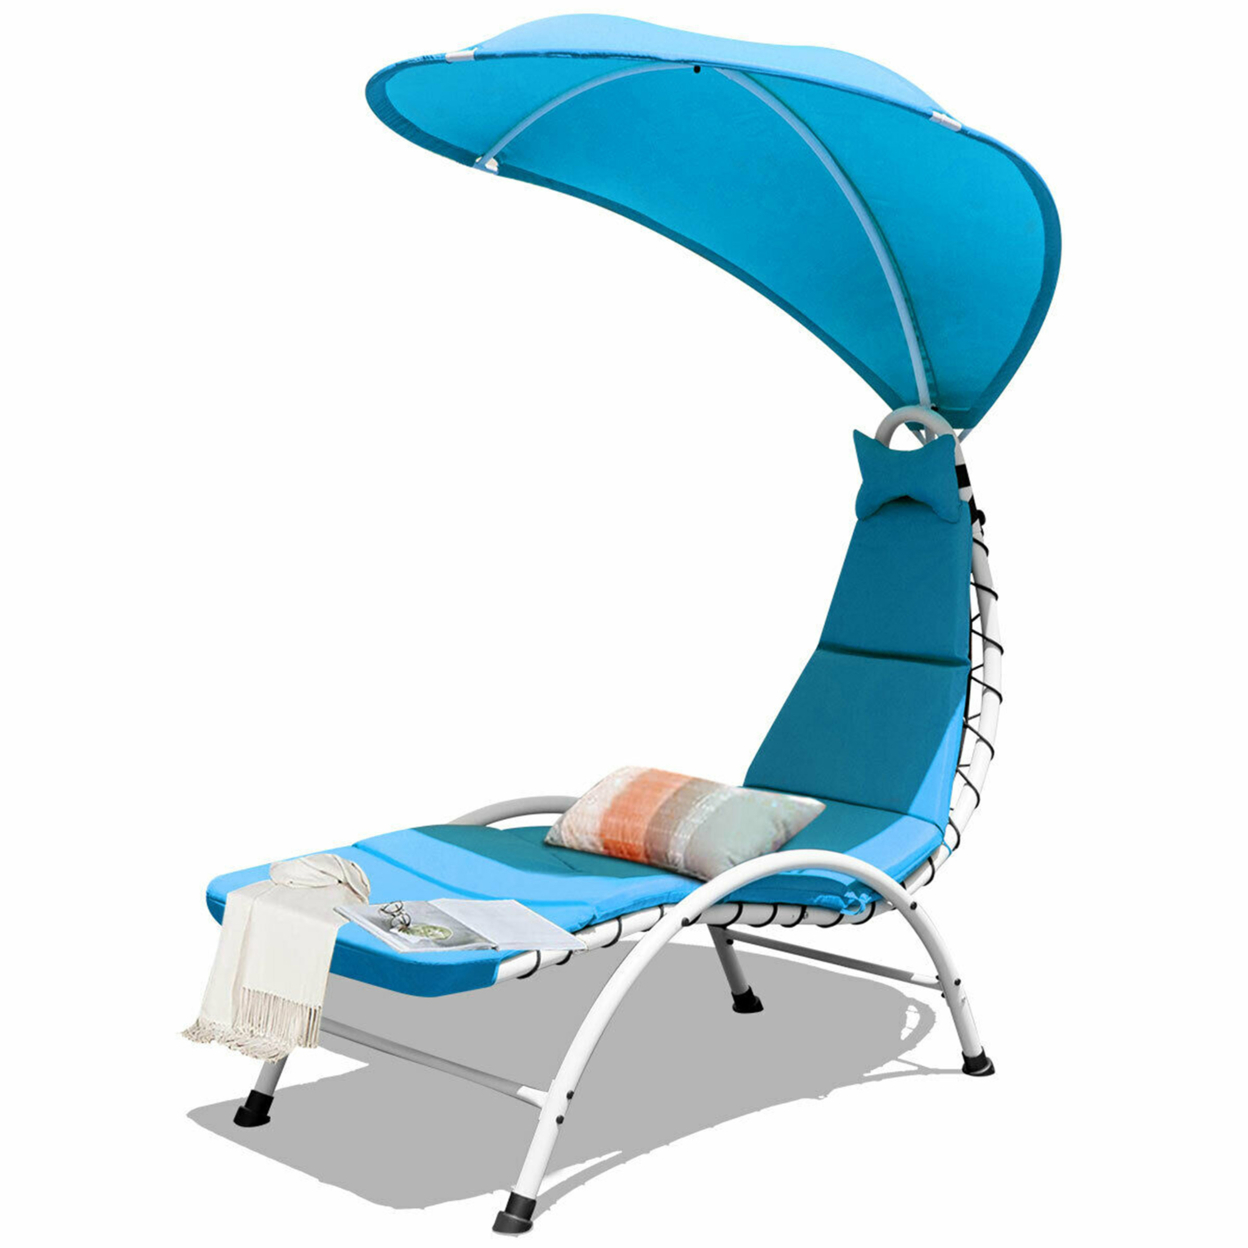 Gymax Patio Lounge Chair Chaise Outdoor W/ Steel Frame Cushion Canopy Turquoise